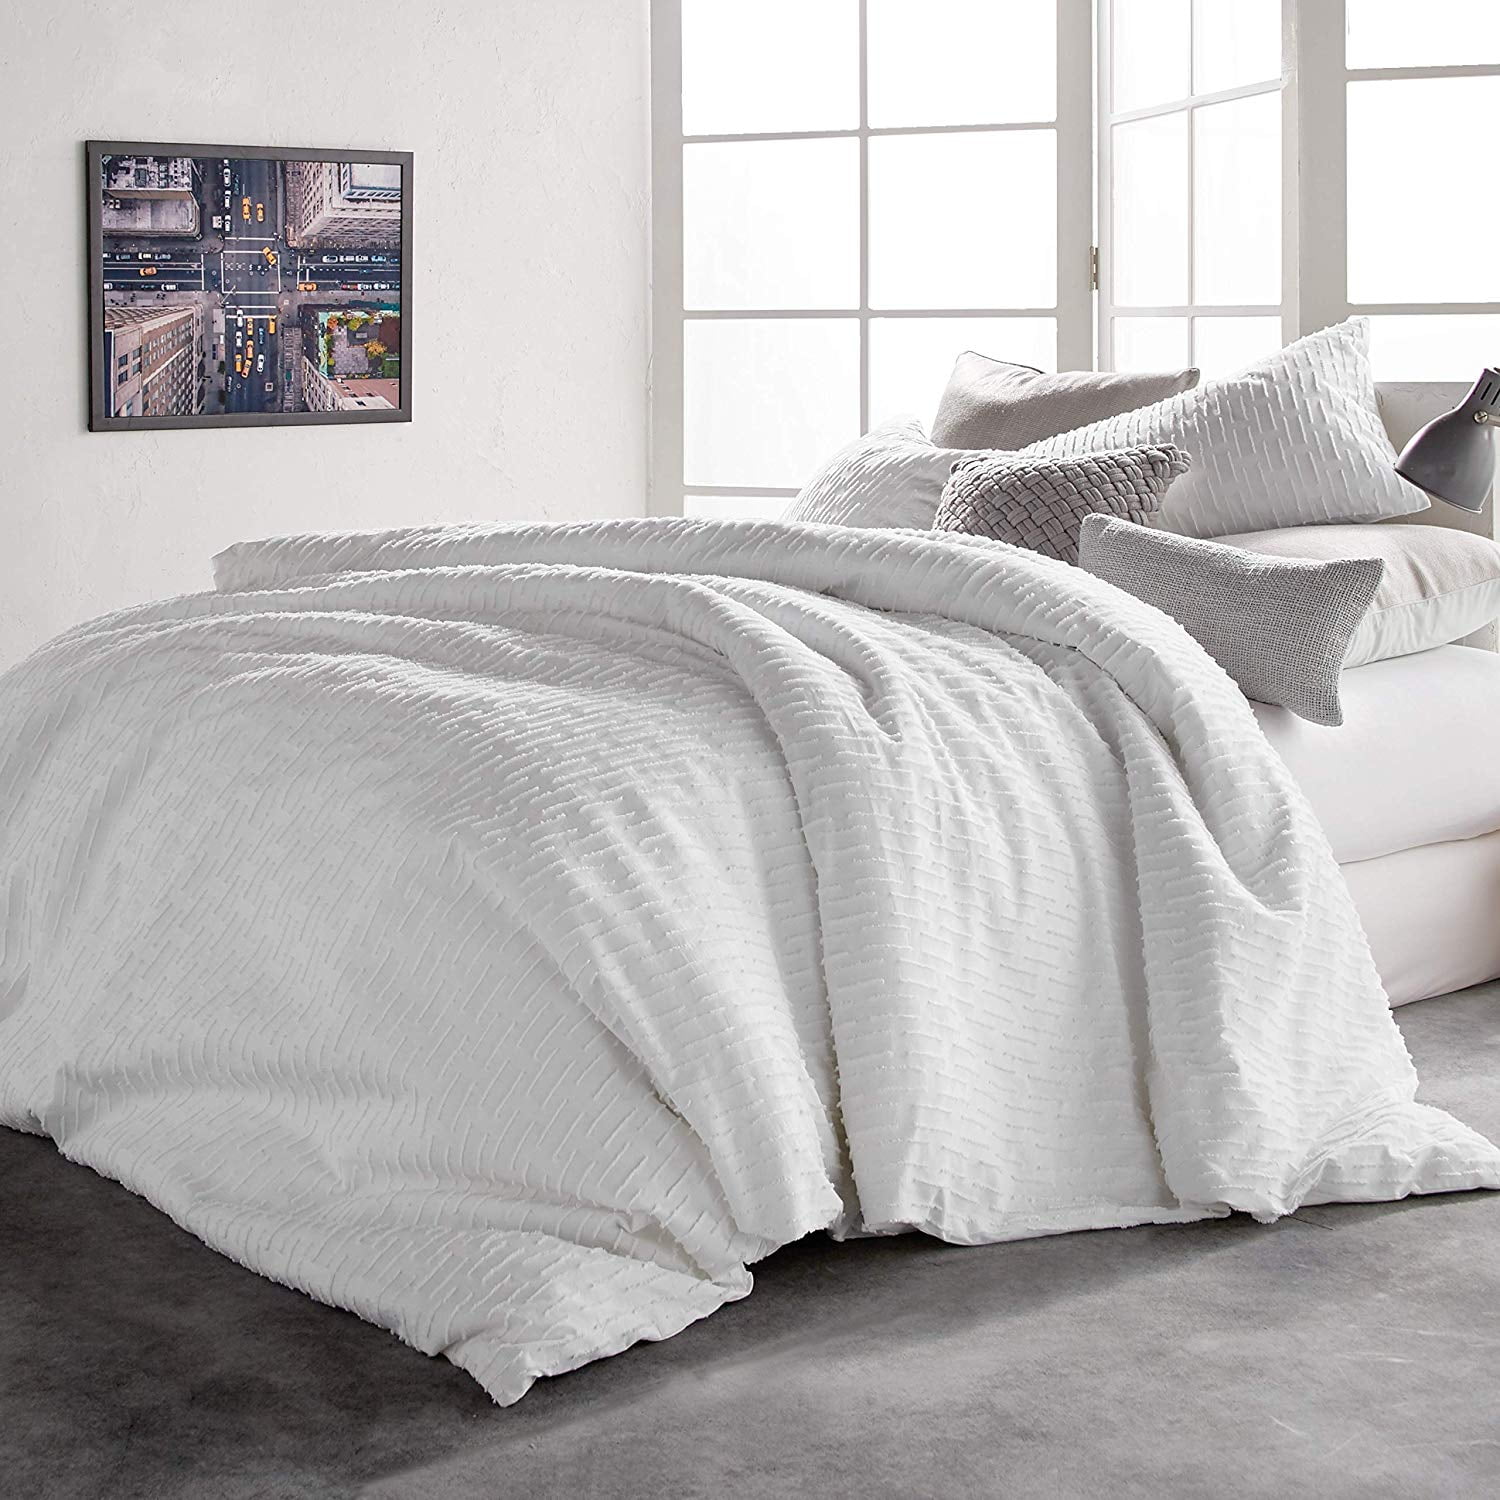 DKNY Refresh AllOver Cut Jacquard Pattern Cotton Duvet Cover, 110 x 96 Inches King, White